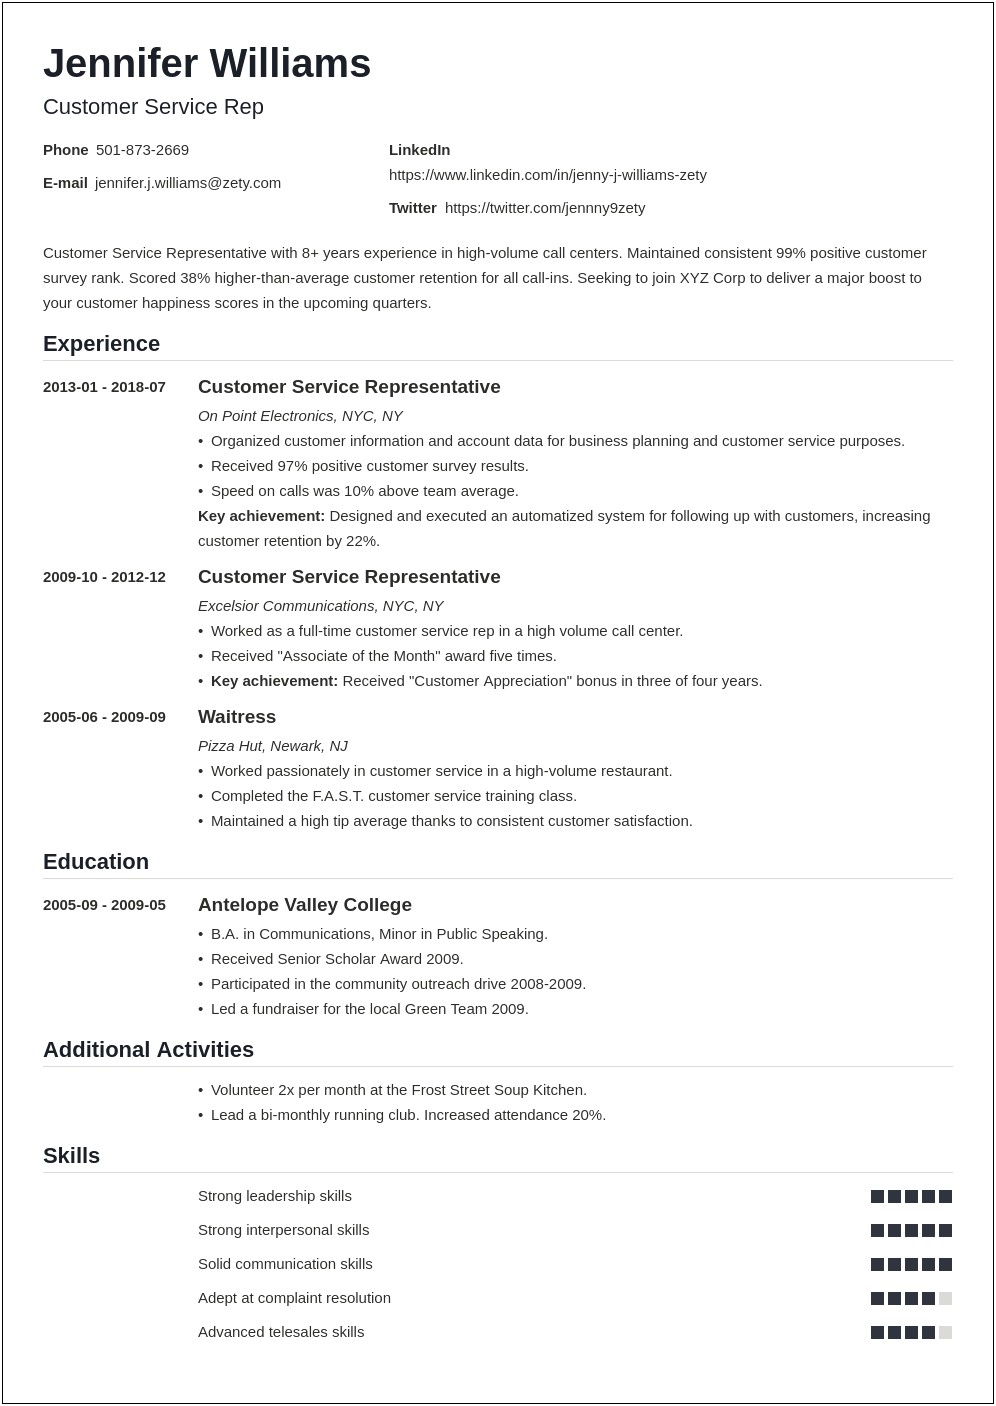 Listing Previous Jobs On Resume